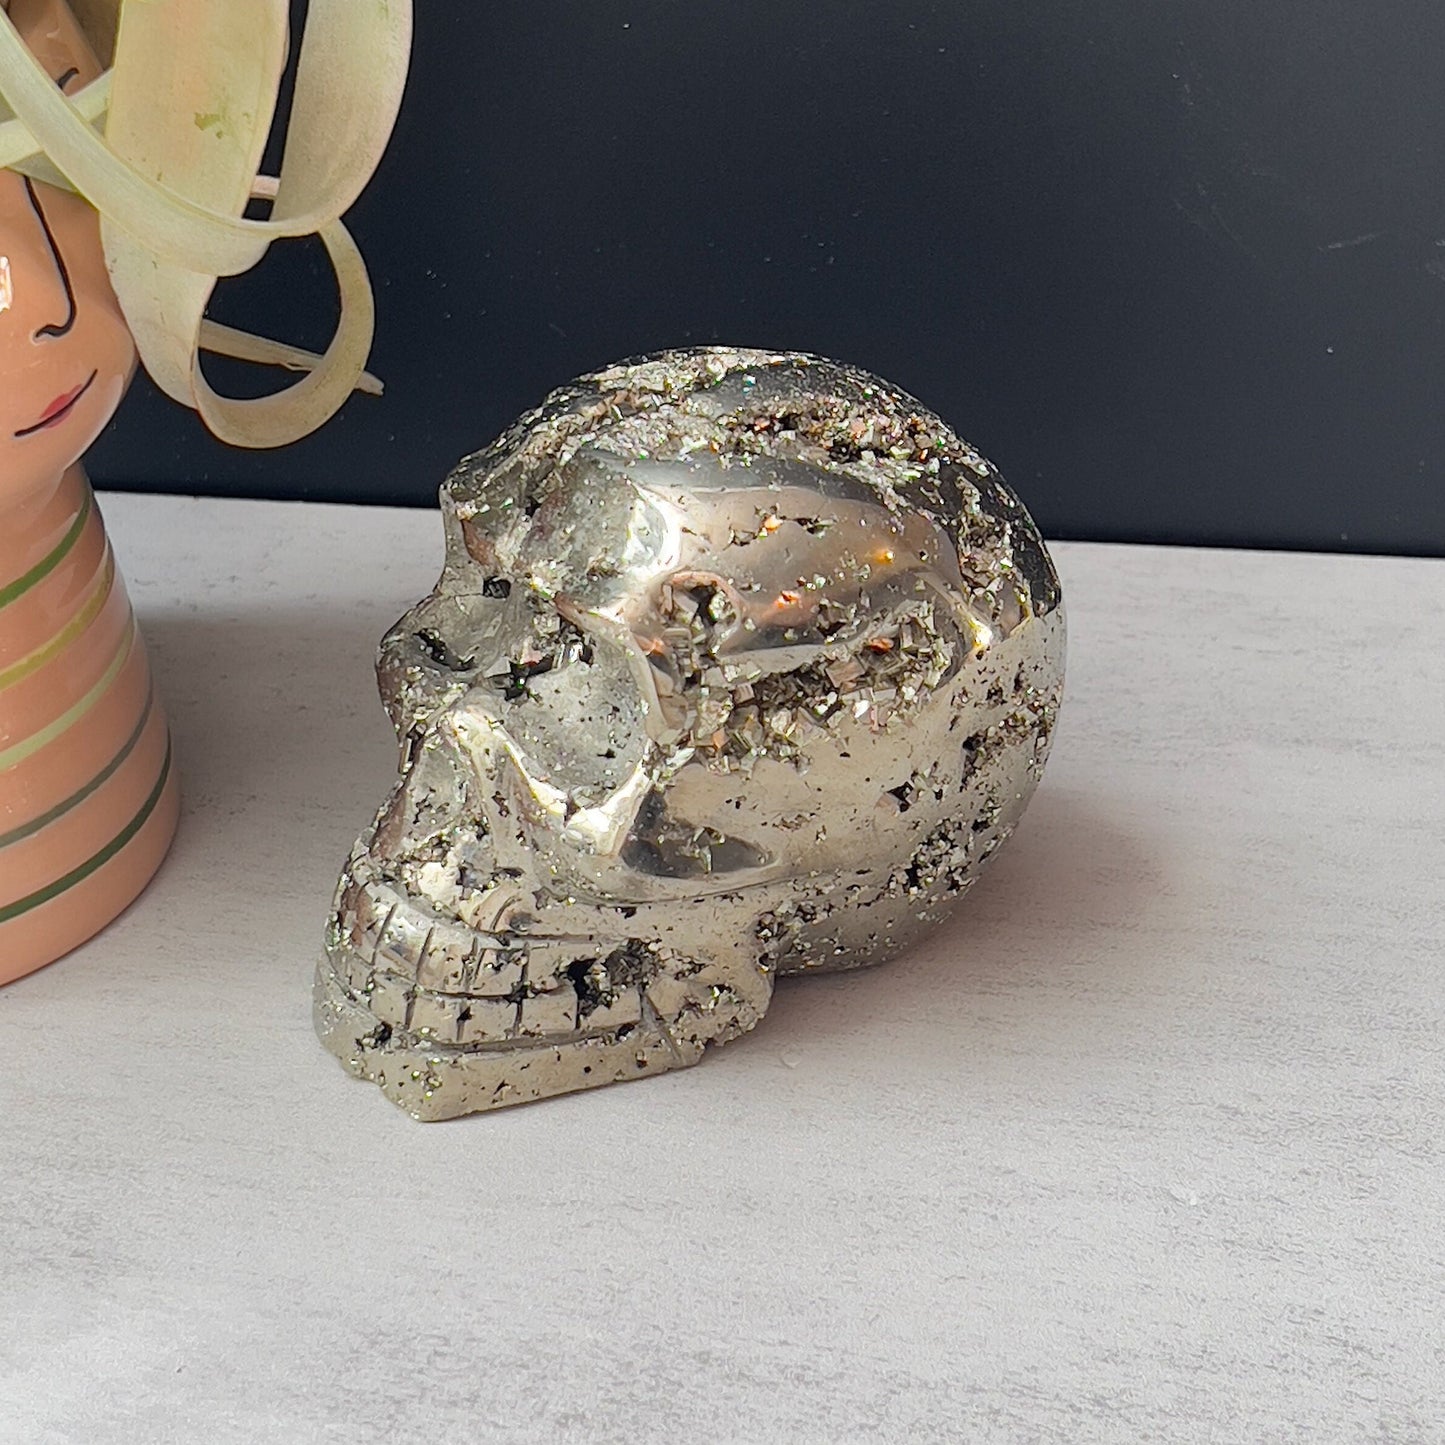 XL PYRITE SKULL with Cubic Formations | High Quality Pyrite Carving from Peru | Unique Crystal Home Decor